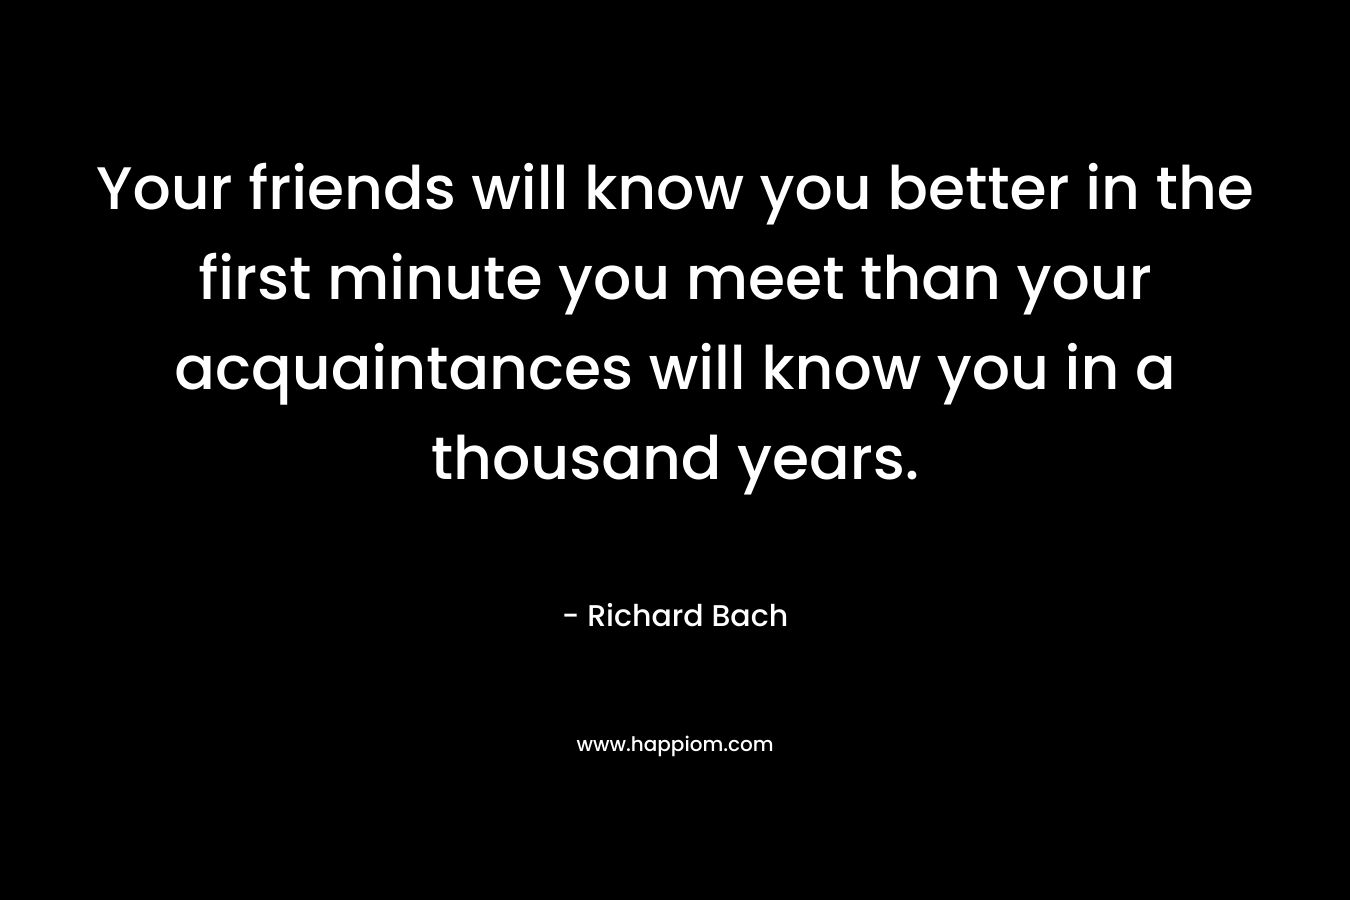 Your friends will know you better in the first minute you meet than your acquaintances will know you in a thousand years. – Richard Bach